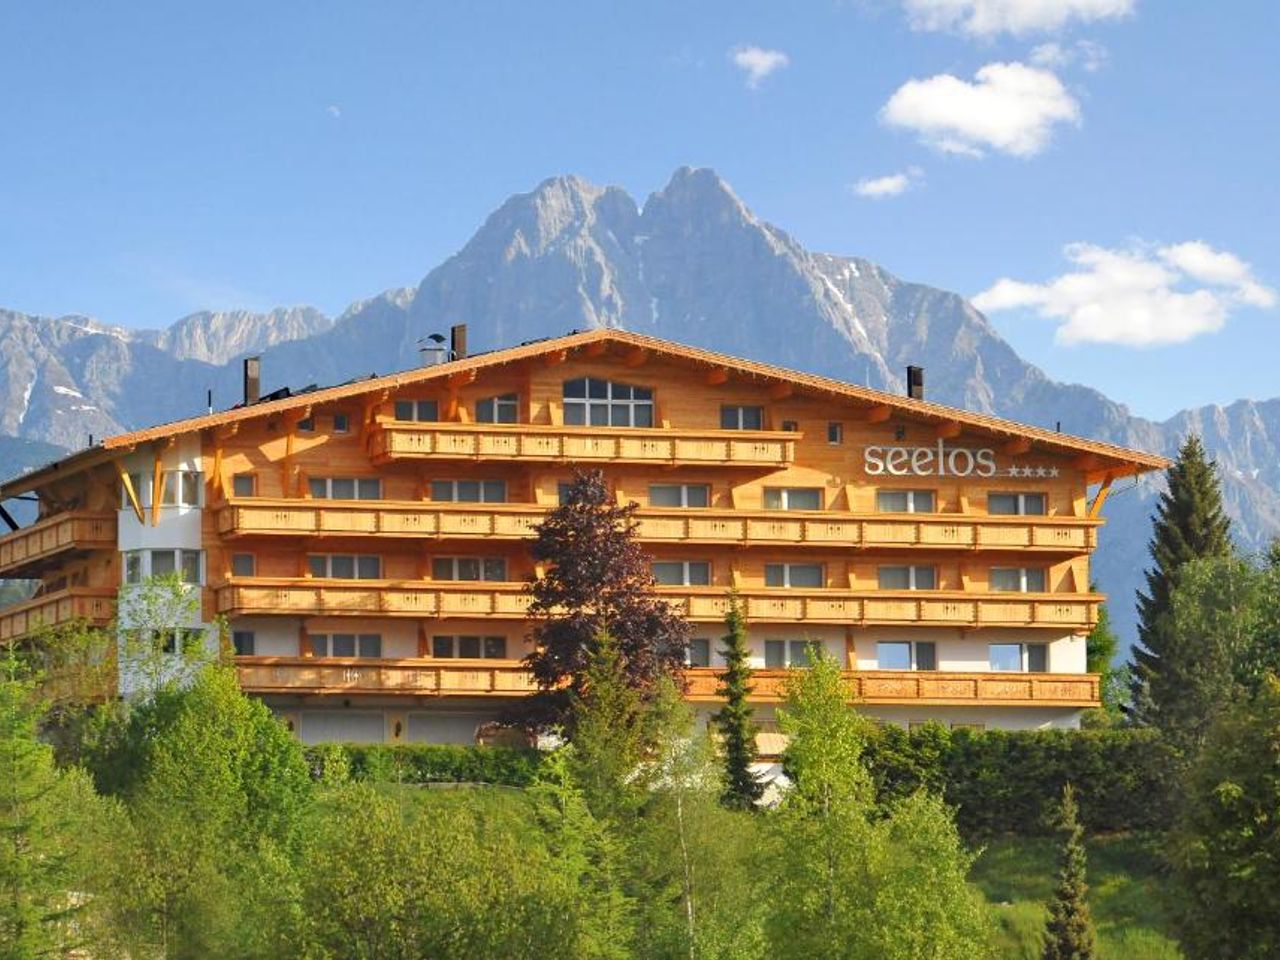 5 Tage Entspannung in Seefeld - Hotel Seelos